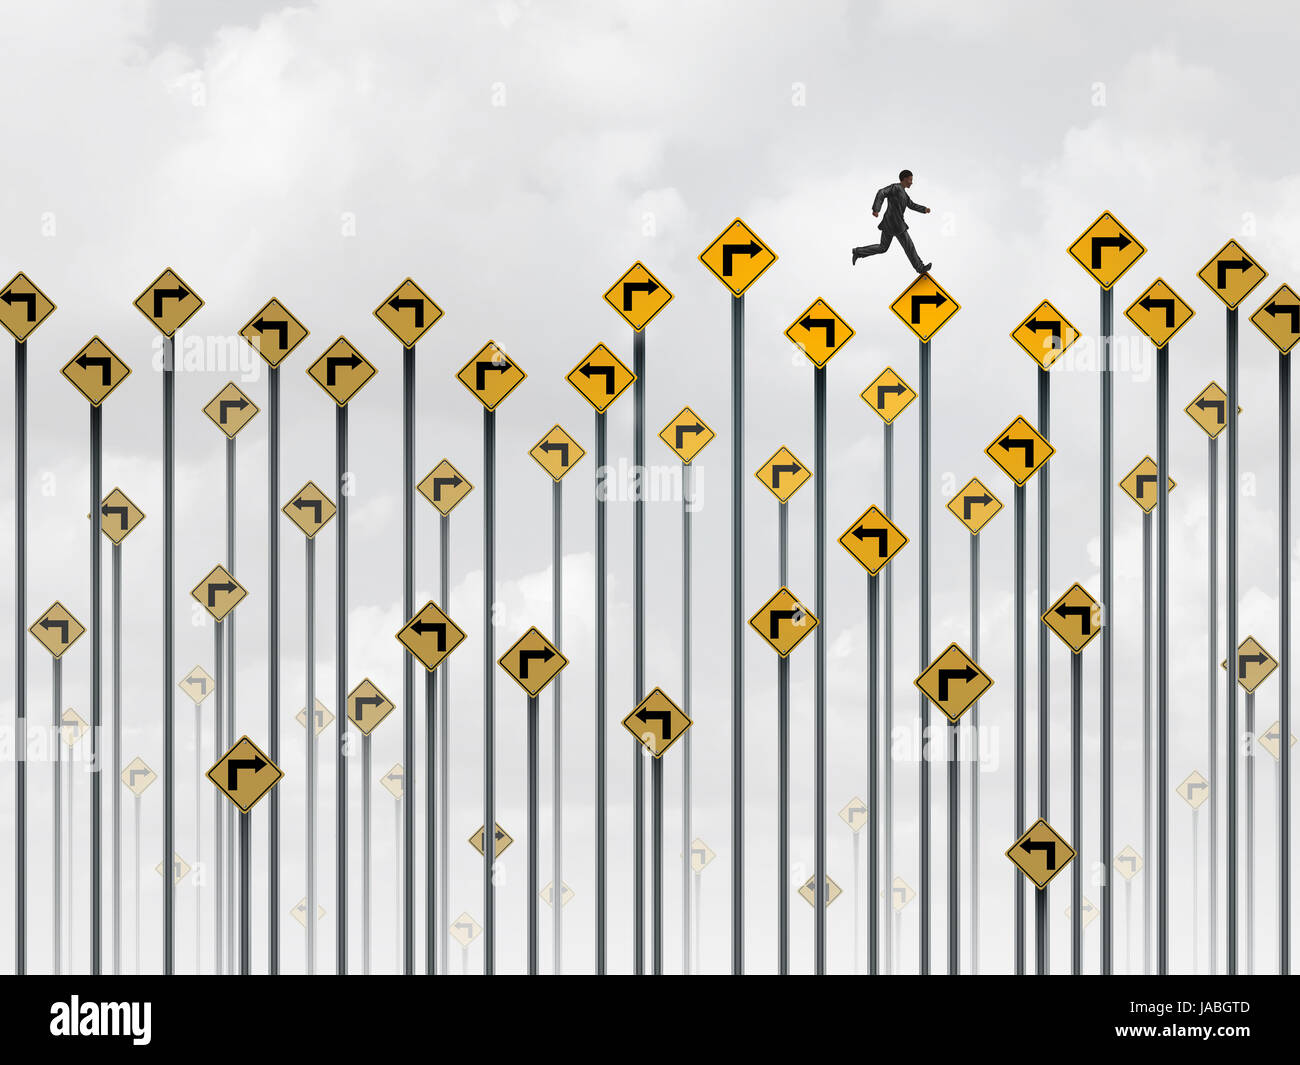 Business strategy path and career pathway plan as a businessman running on confusing arrow traffic signs as an ambition and goal focus. Stock Photo